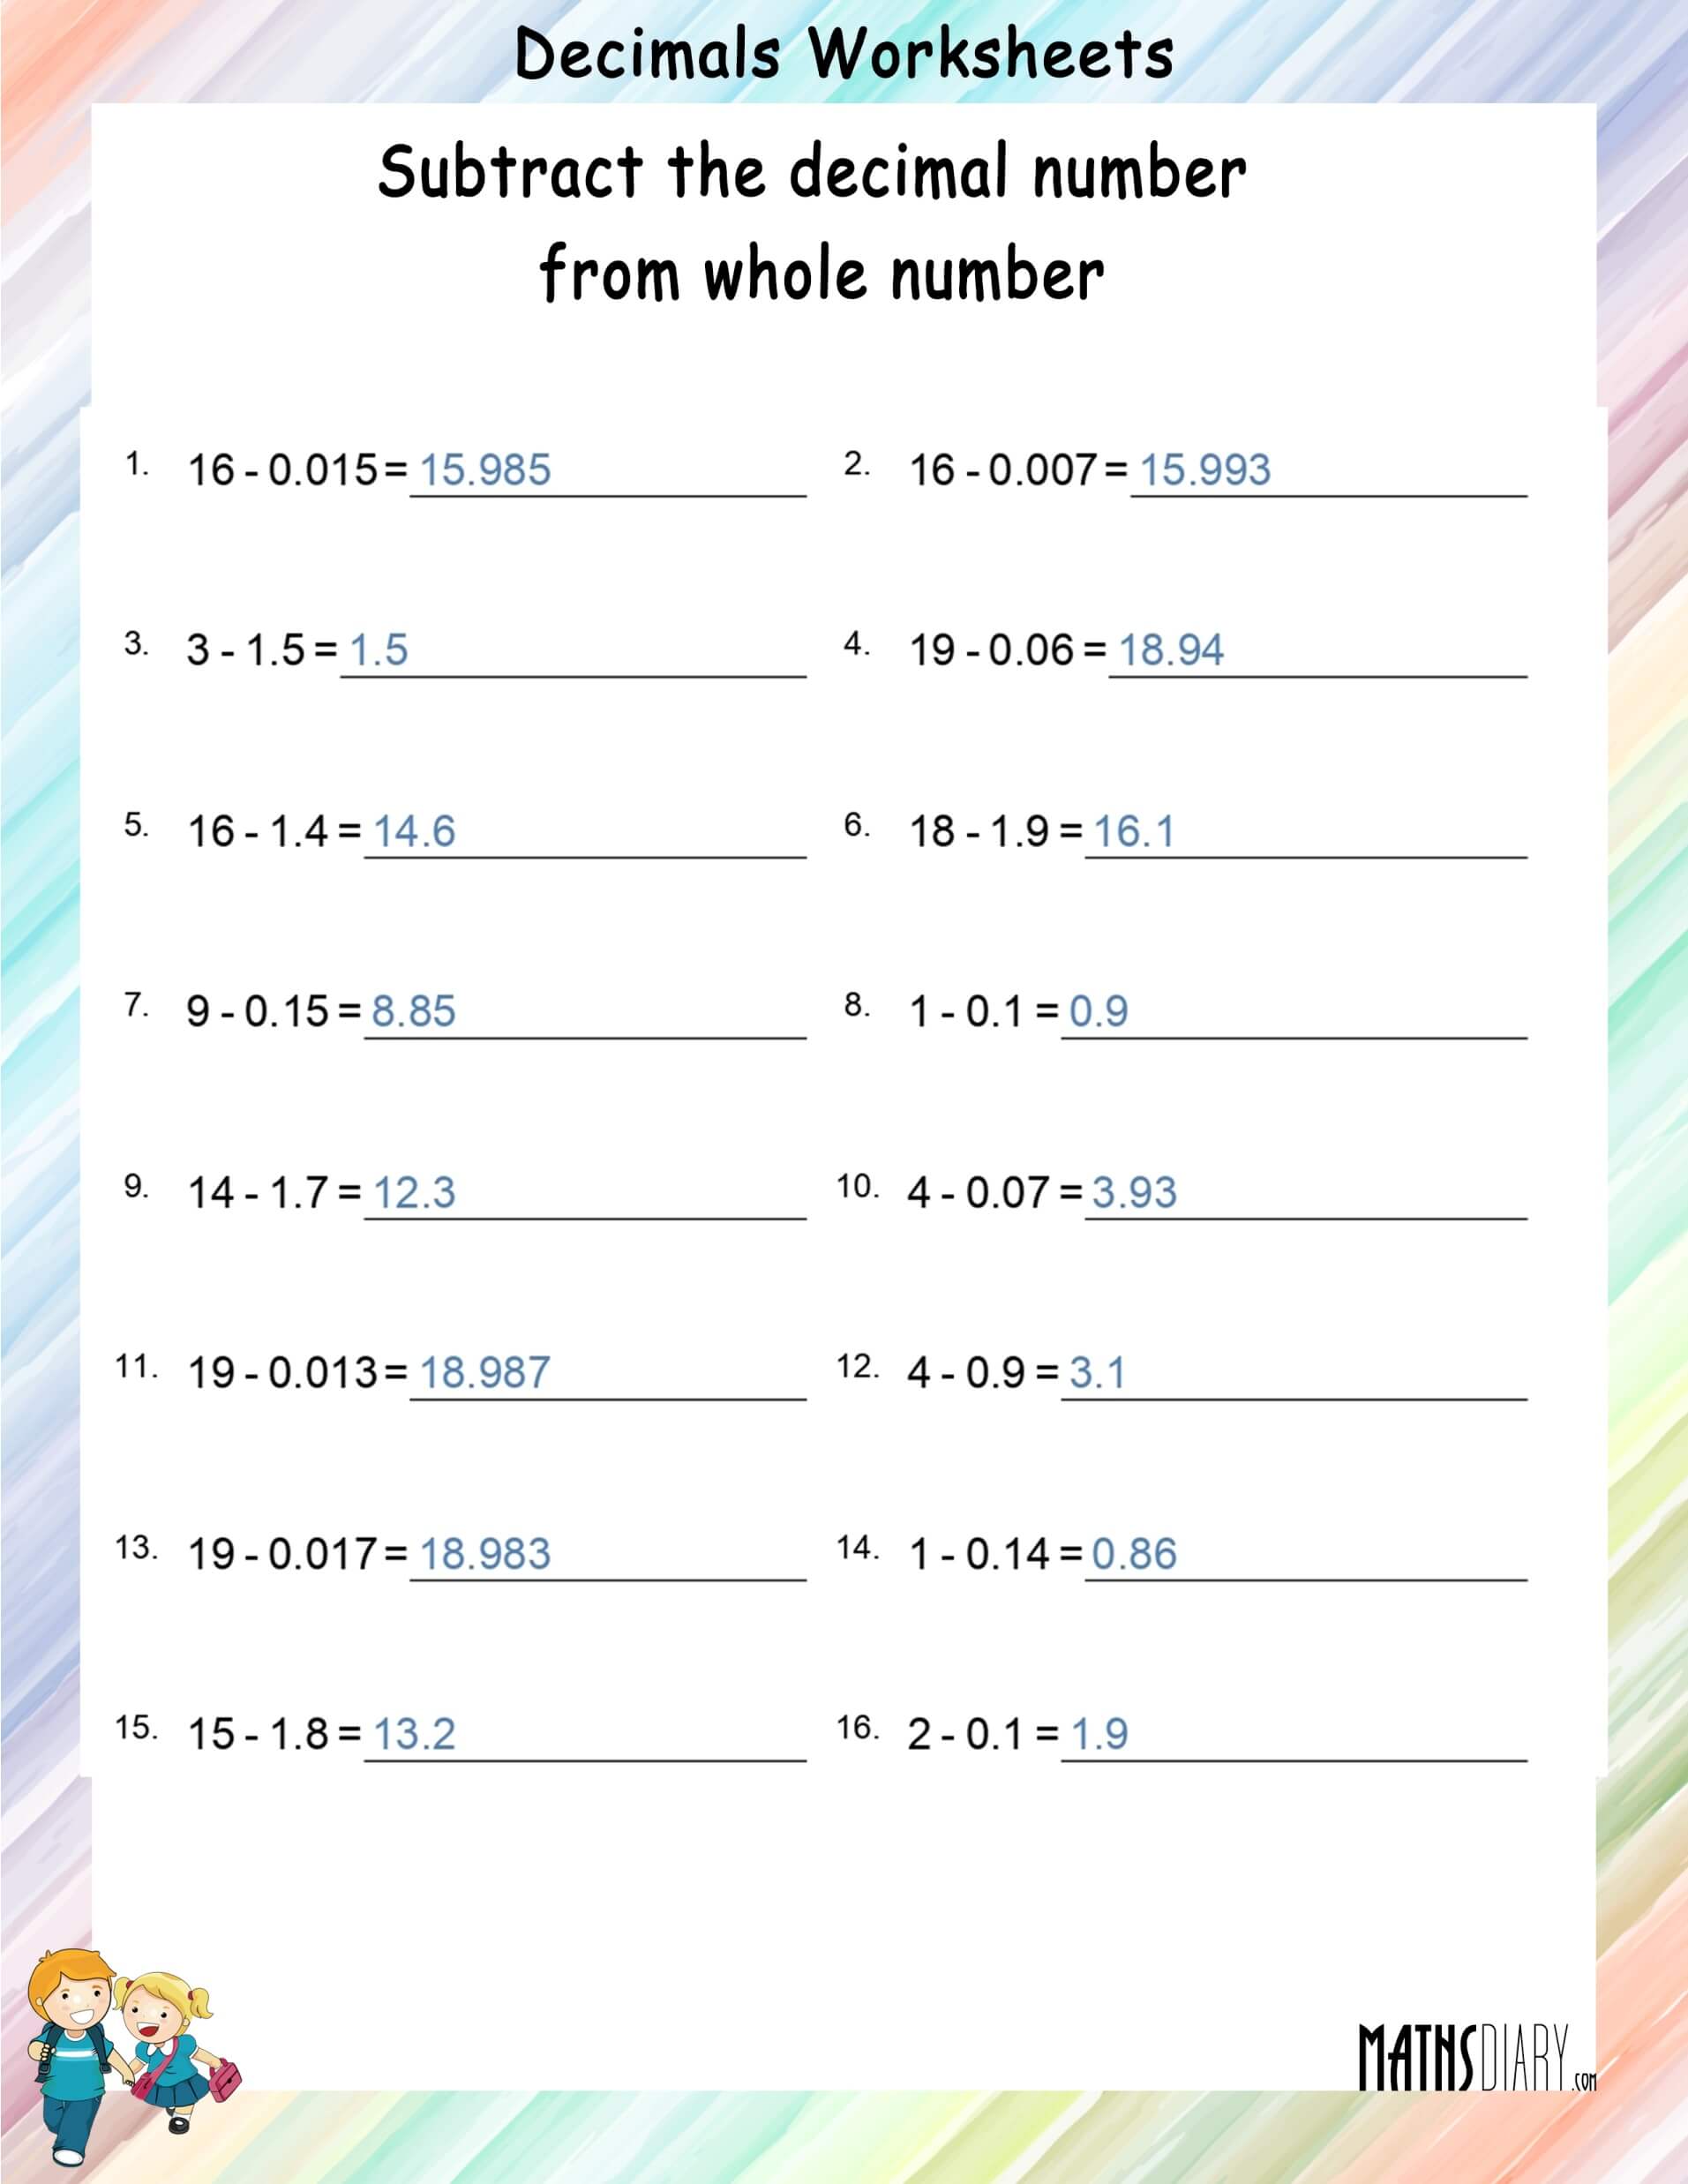 subtract-the-decimal-number-from-the-whole-number-math-worksheets